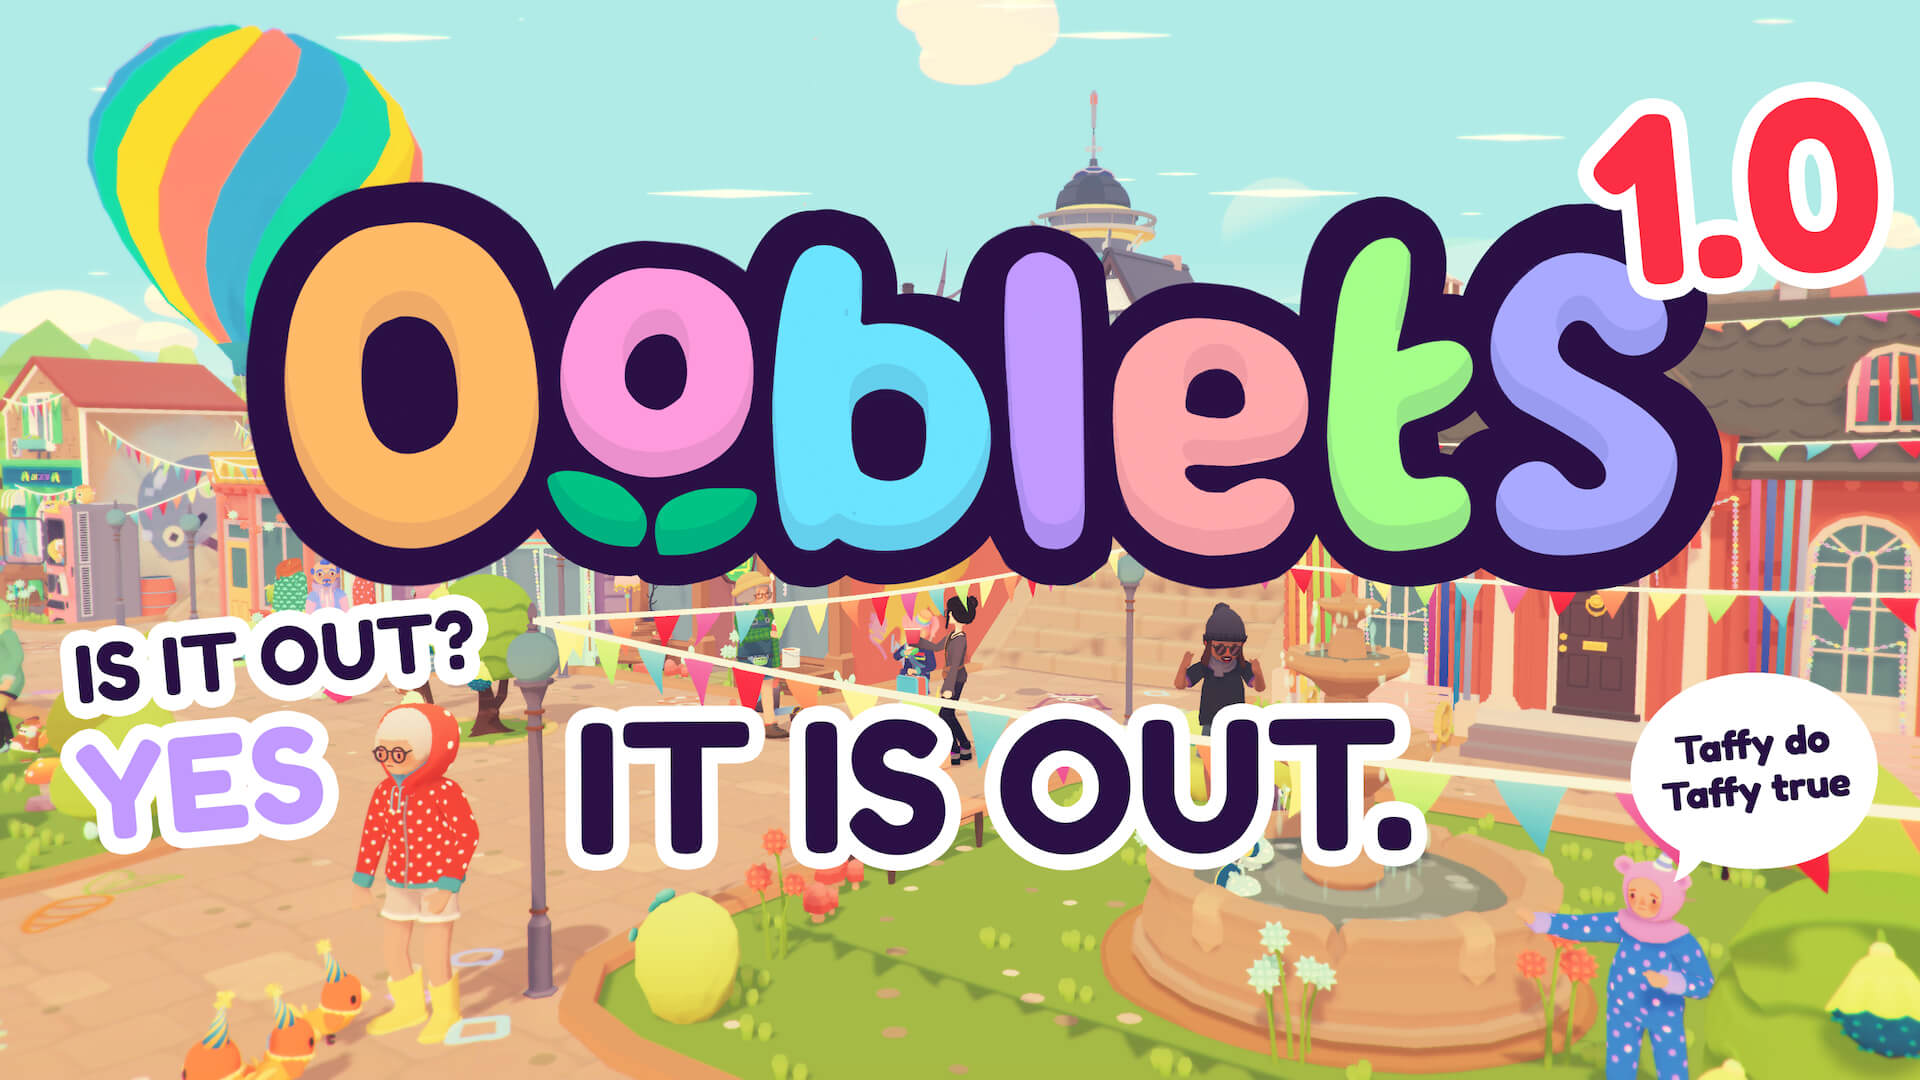 now! out 1.0 Ooblets is